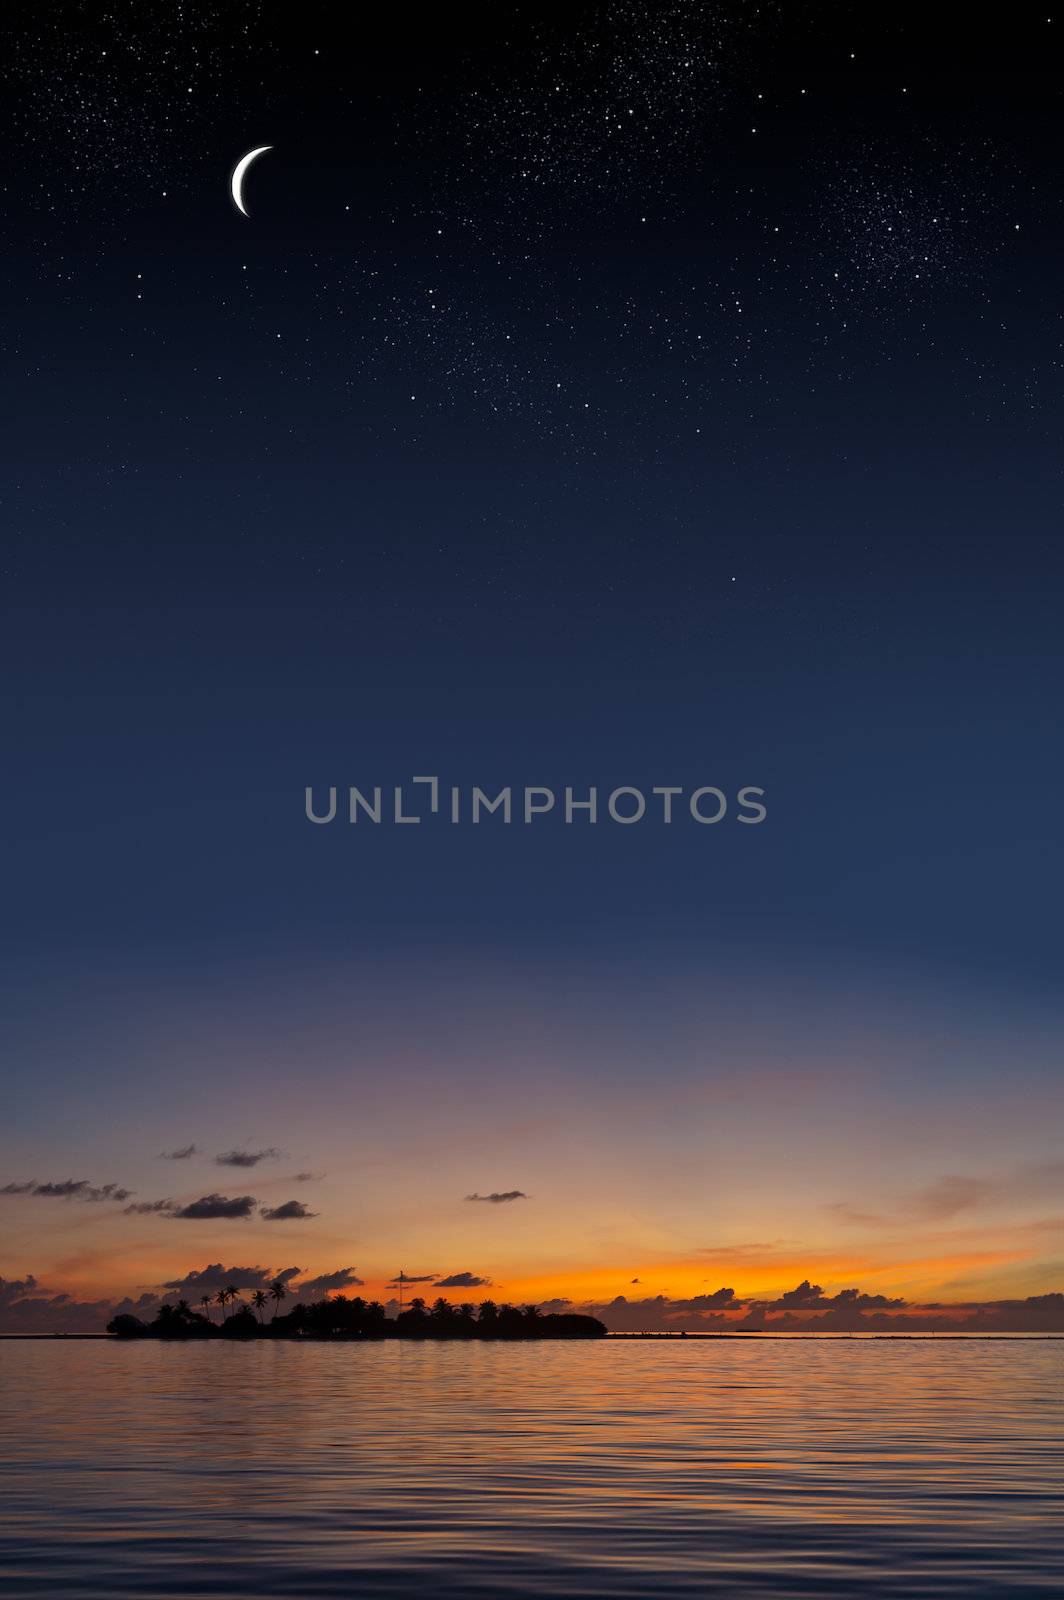 Tropical sunset with an island shilouette under a starry sky